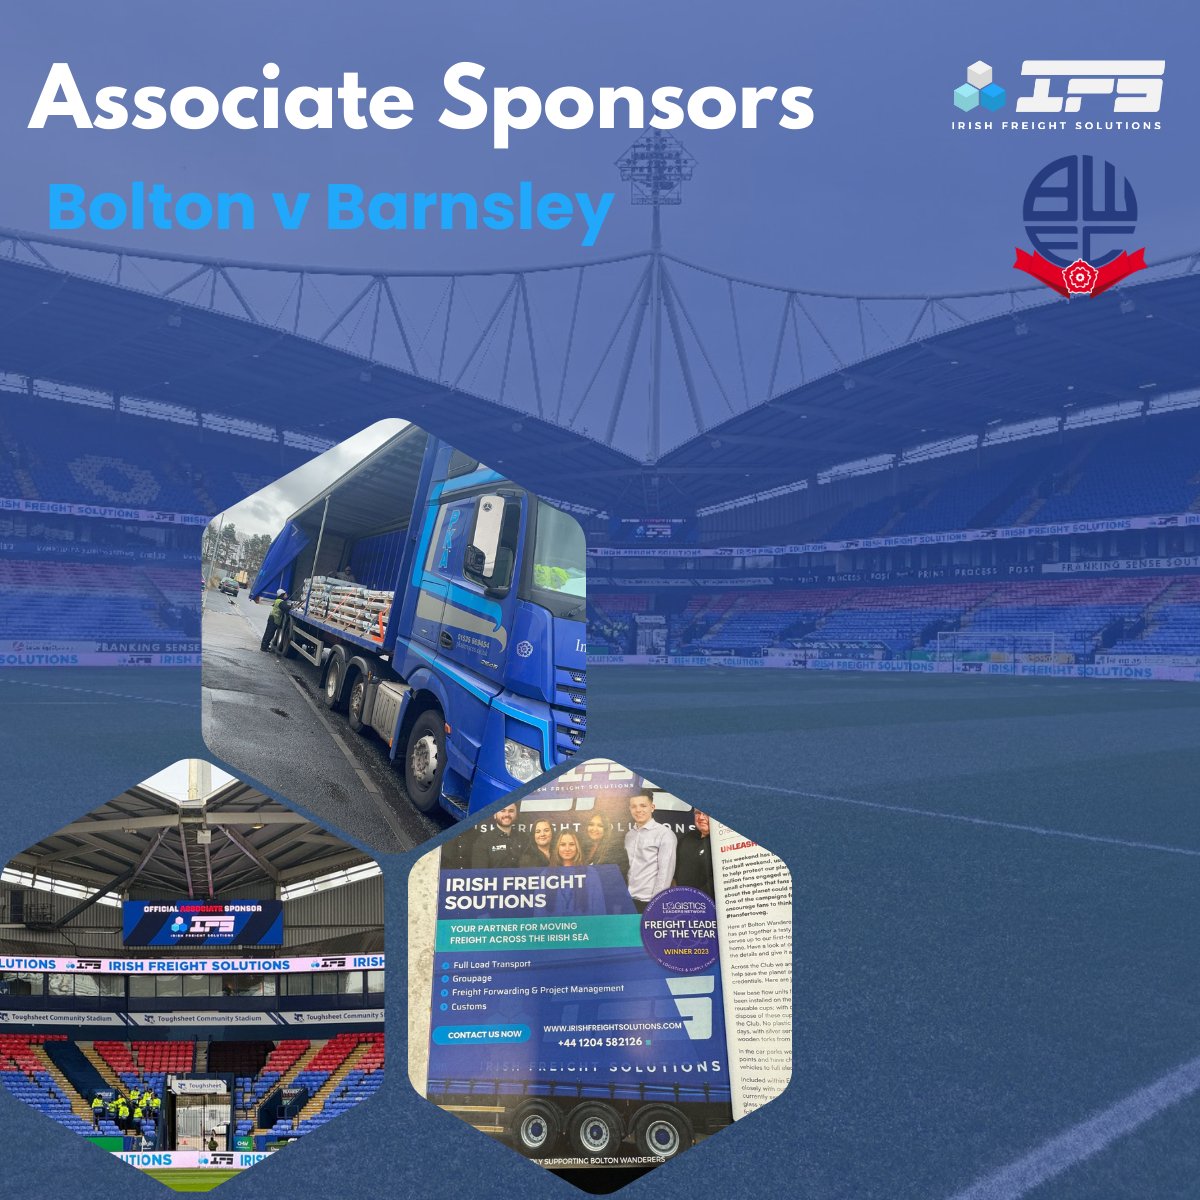 As proud Boltonians, we at Irish Freight Solutions were honoured associate sponsors of the recent Bolton Wanderers vs Barnsley FC match. We sincerely thank our partners Bolton Wanderers for allowing us to support the club once again.